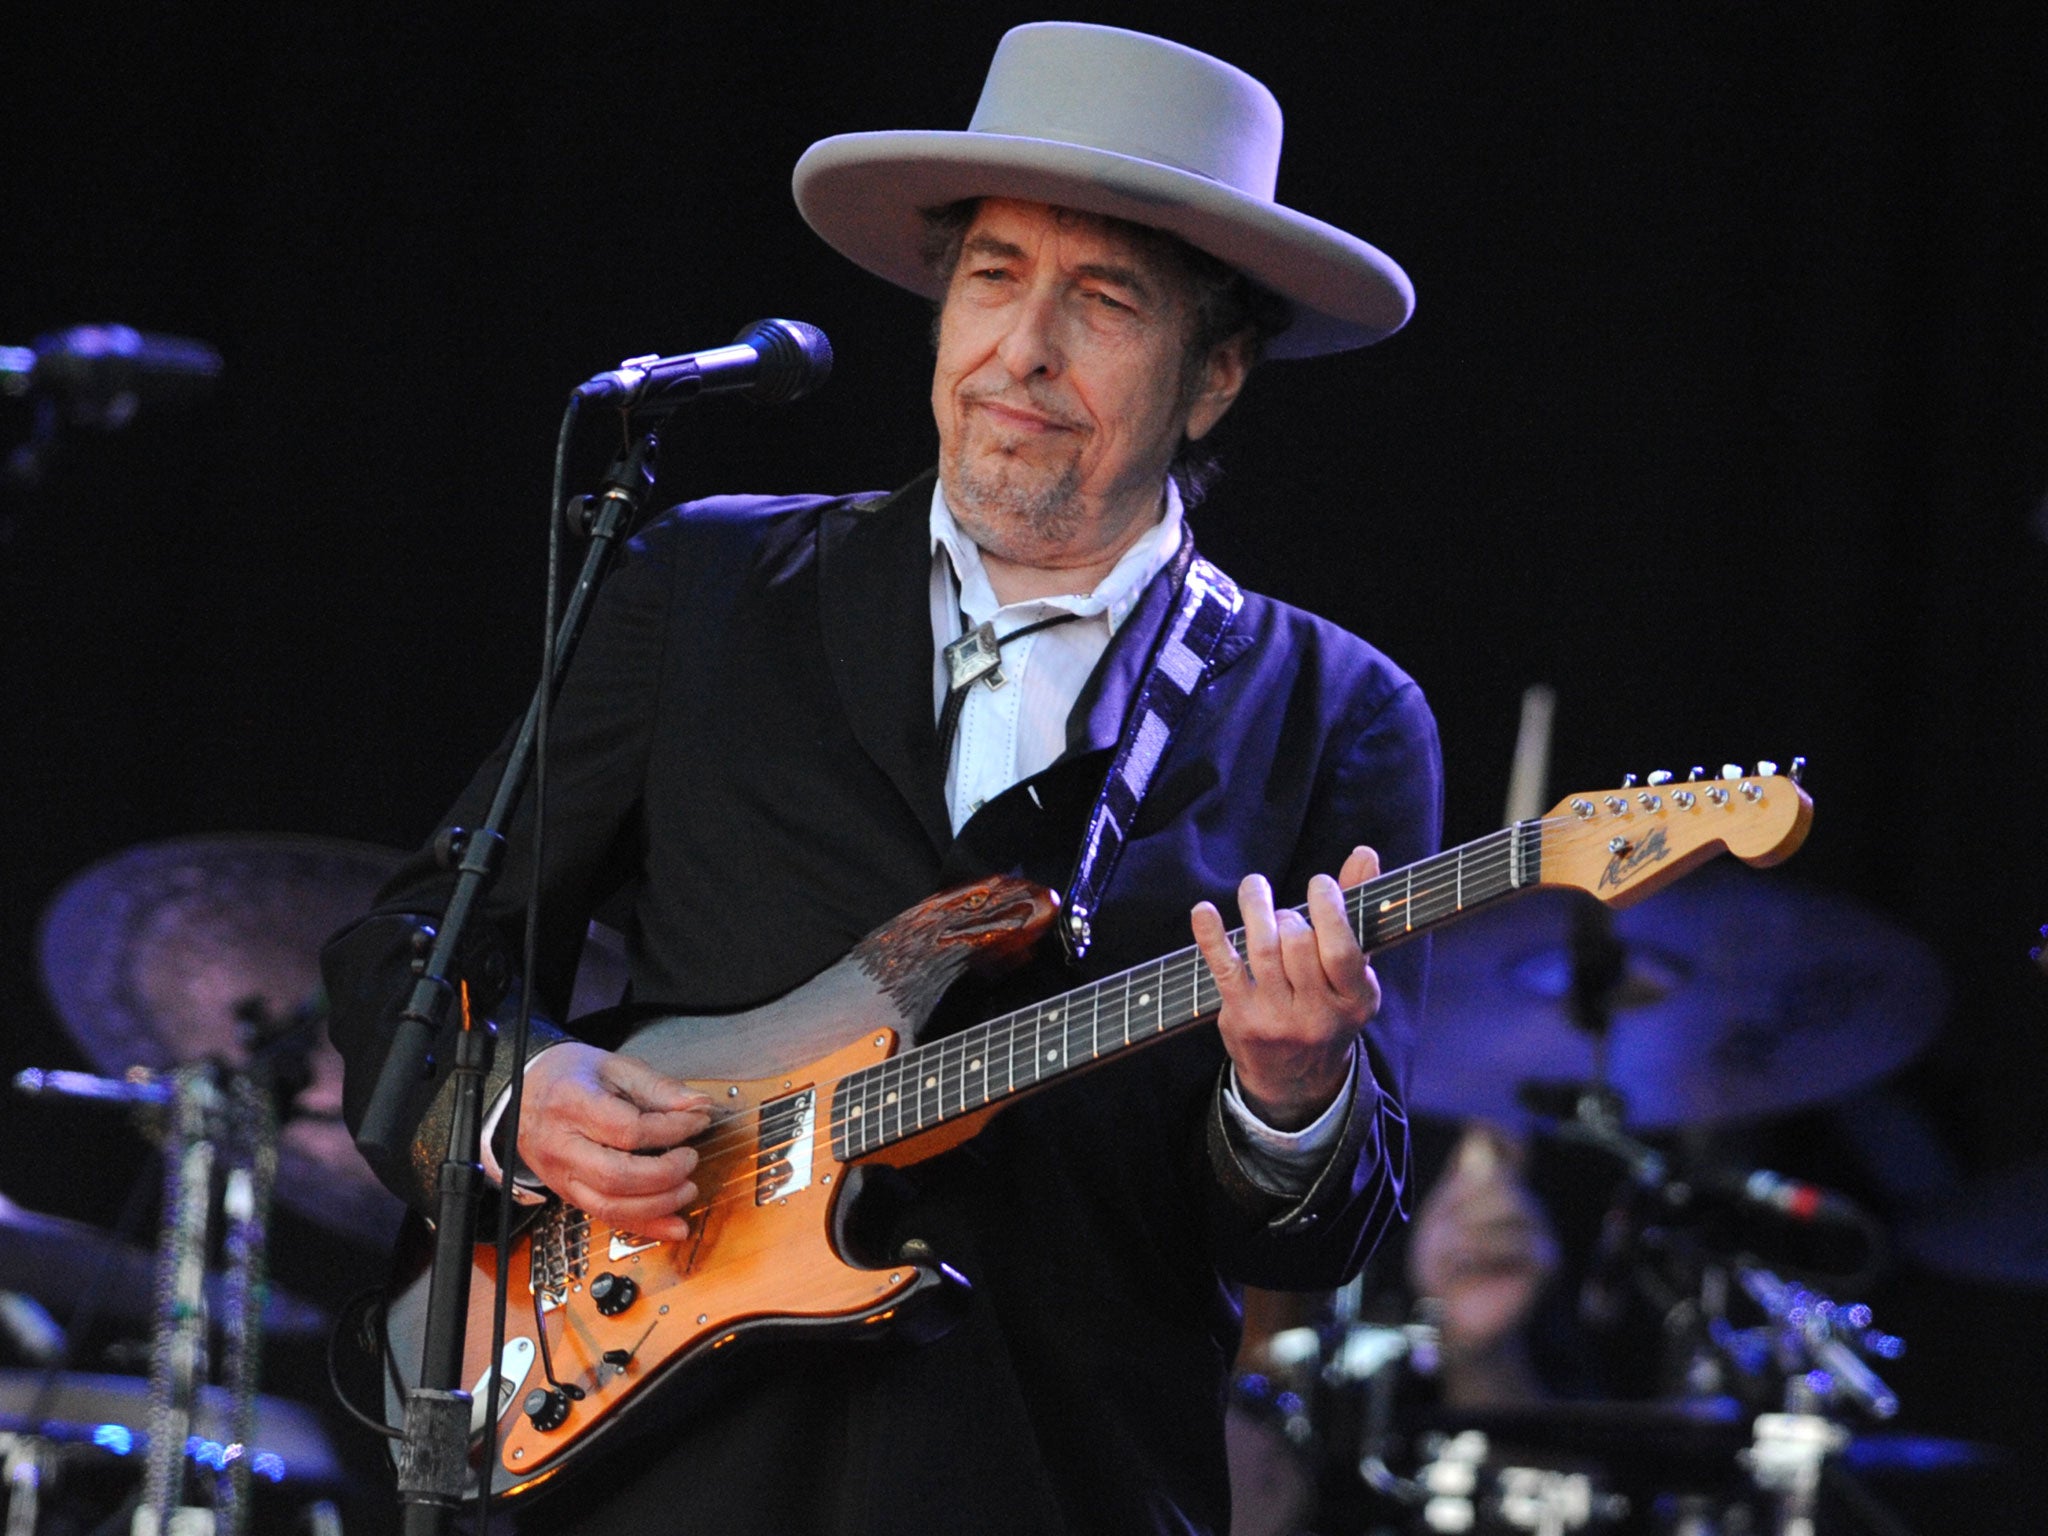 Now Dylan fans can trace every step of the iconic song's genesis